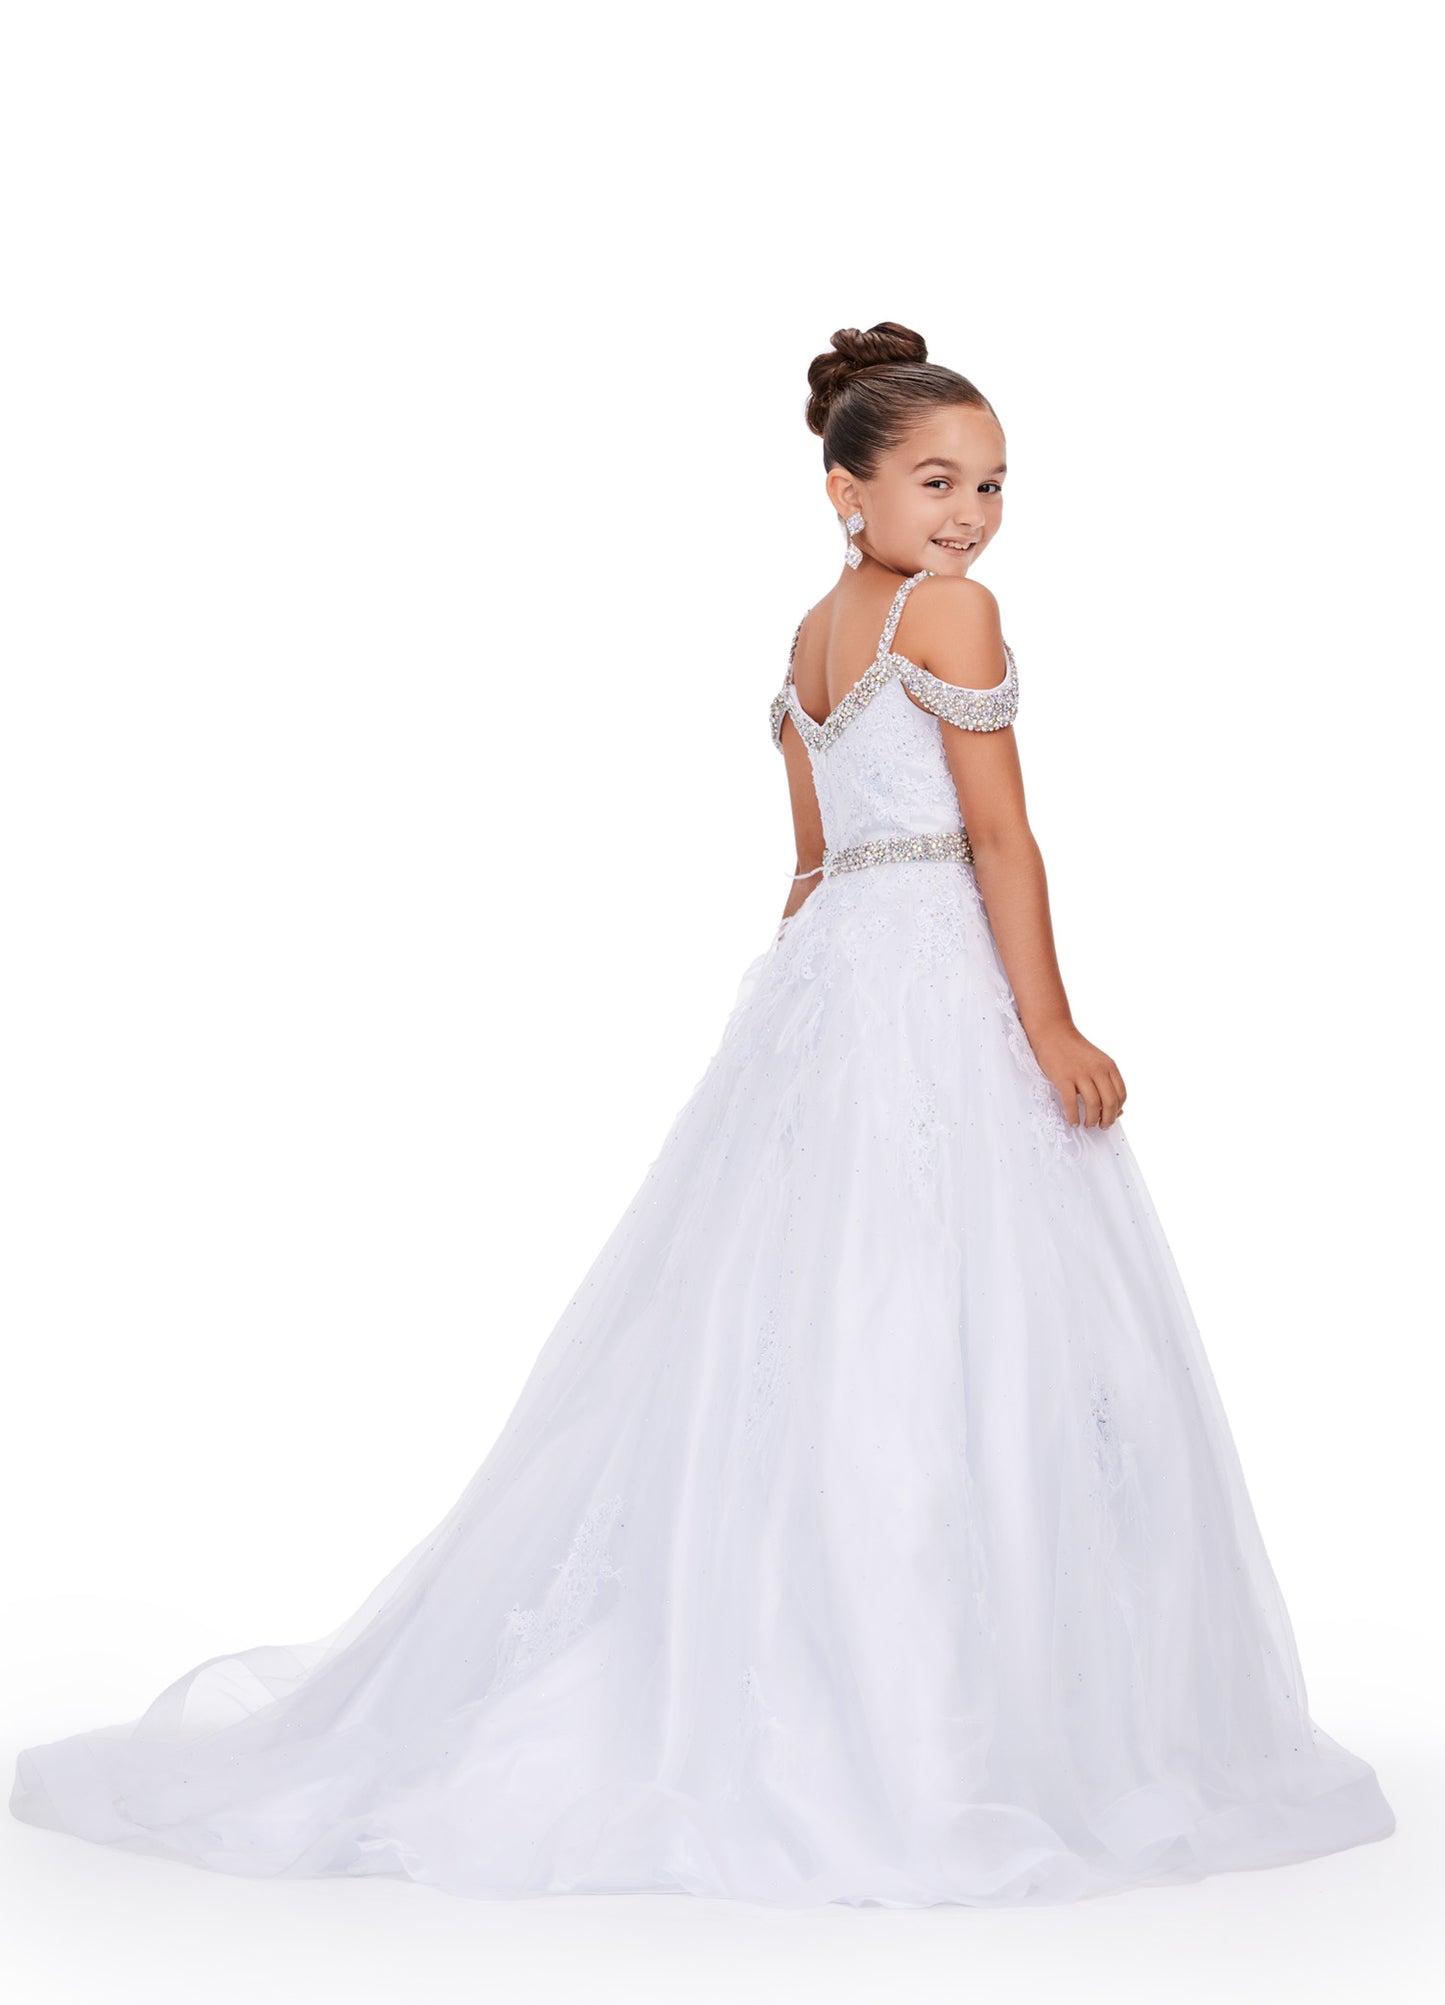 This stunning Ashley Lauren Kids 8242 ballgown is crafted with beautiful white feather lace and features an off-the-shoulder cut. The crystal bodice brings a romantic and princess-like feel to this pageant dress. Perfect for your little one special day.  Size: 10  Color: Hot Pink